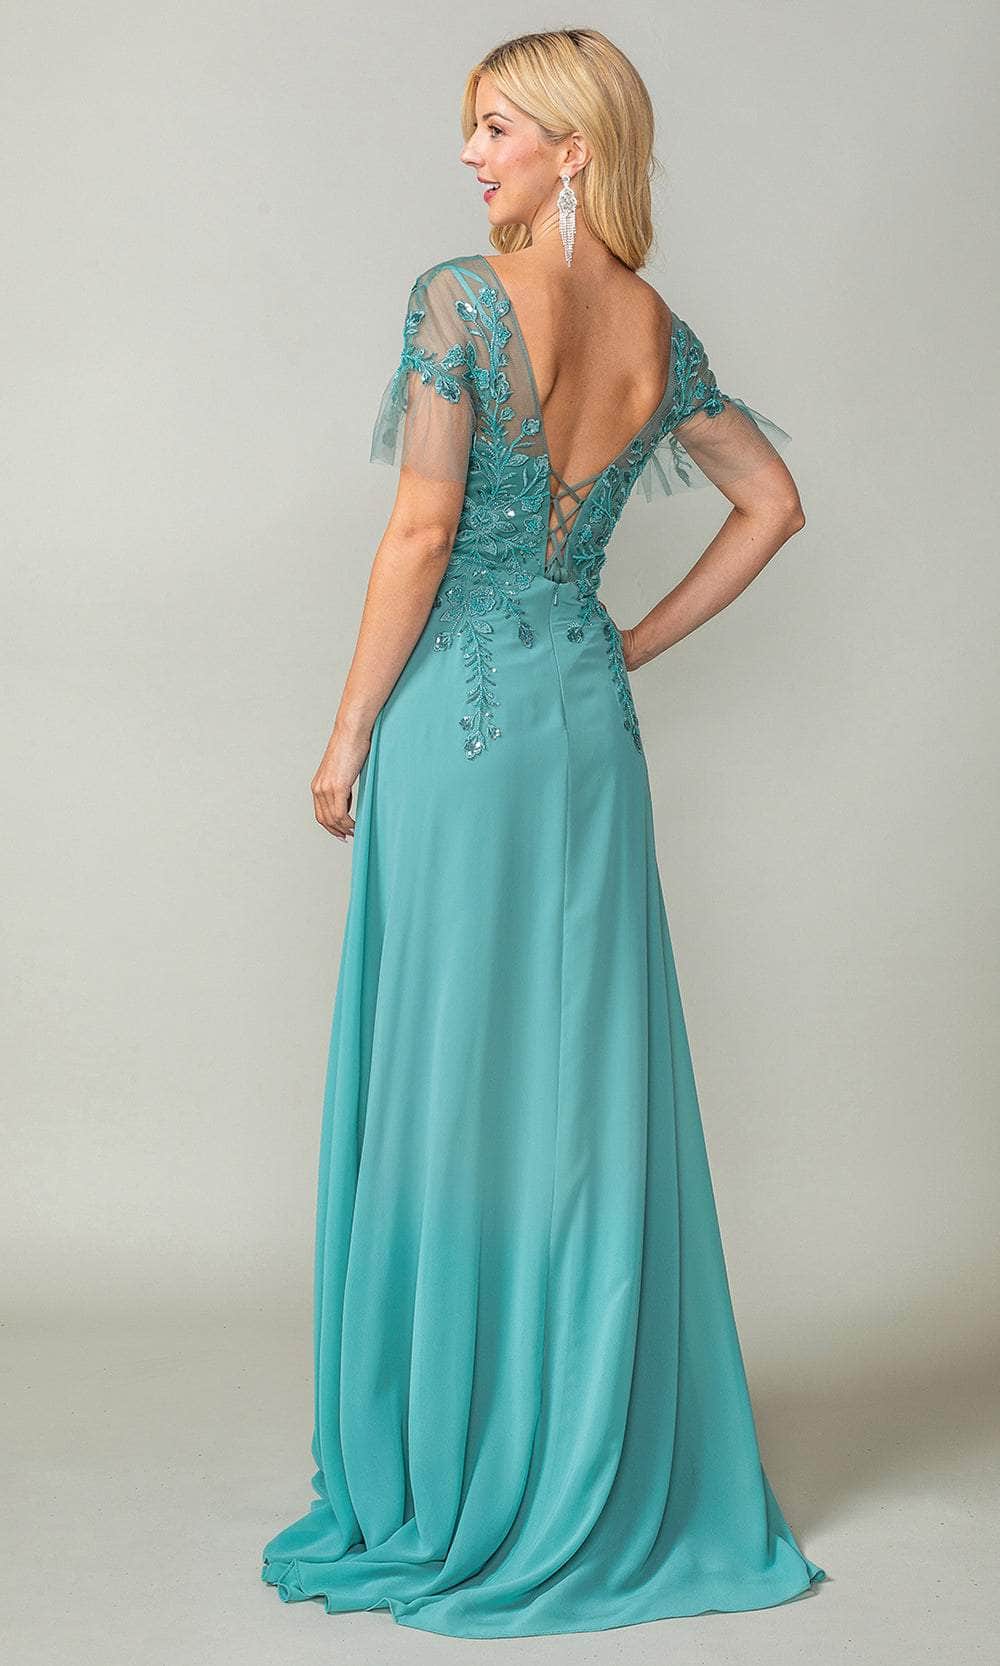 Dancing Queen 4378 - Embroidered A-Line Prom Dress Prom Dresses 